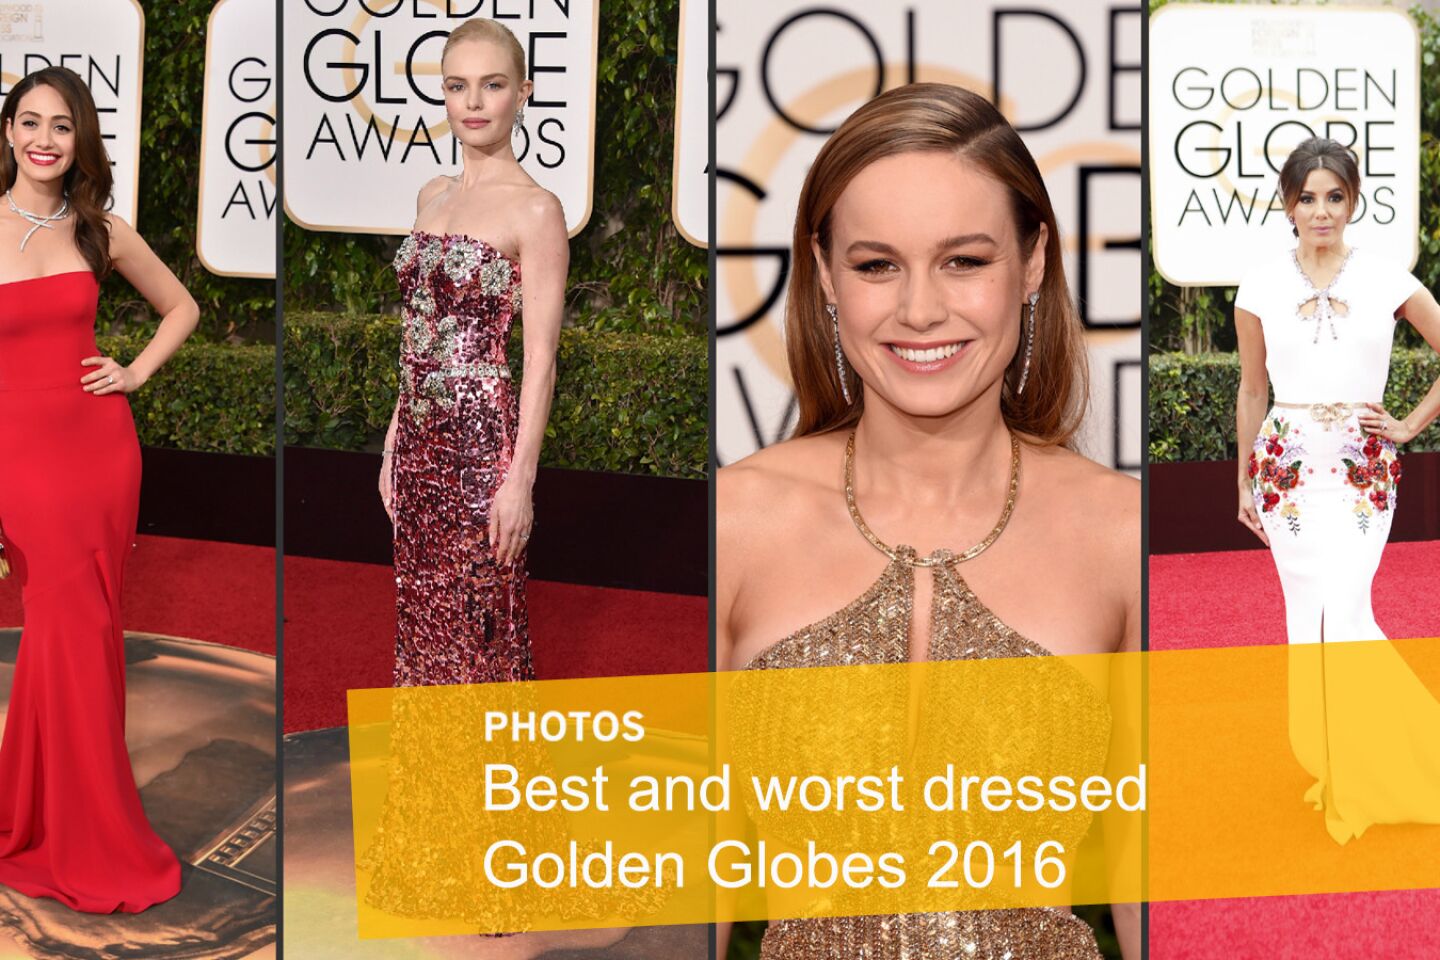 Golden Globes 2016: Best and worst dressed